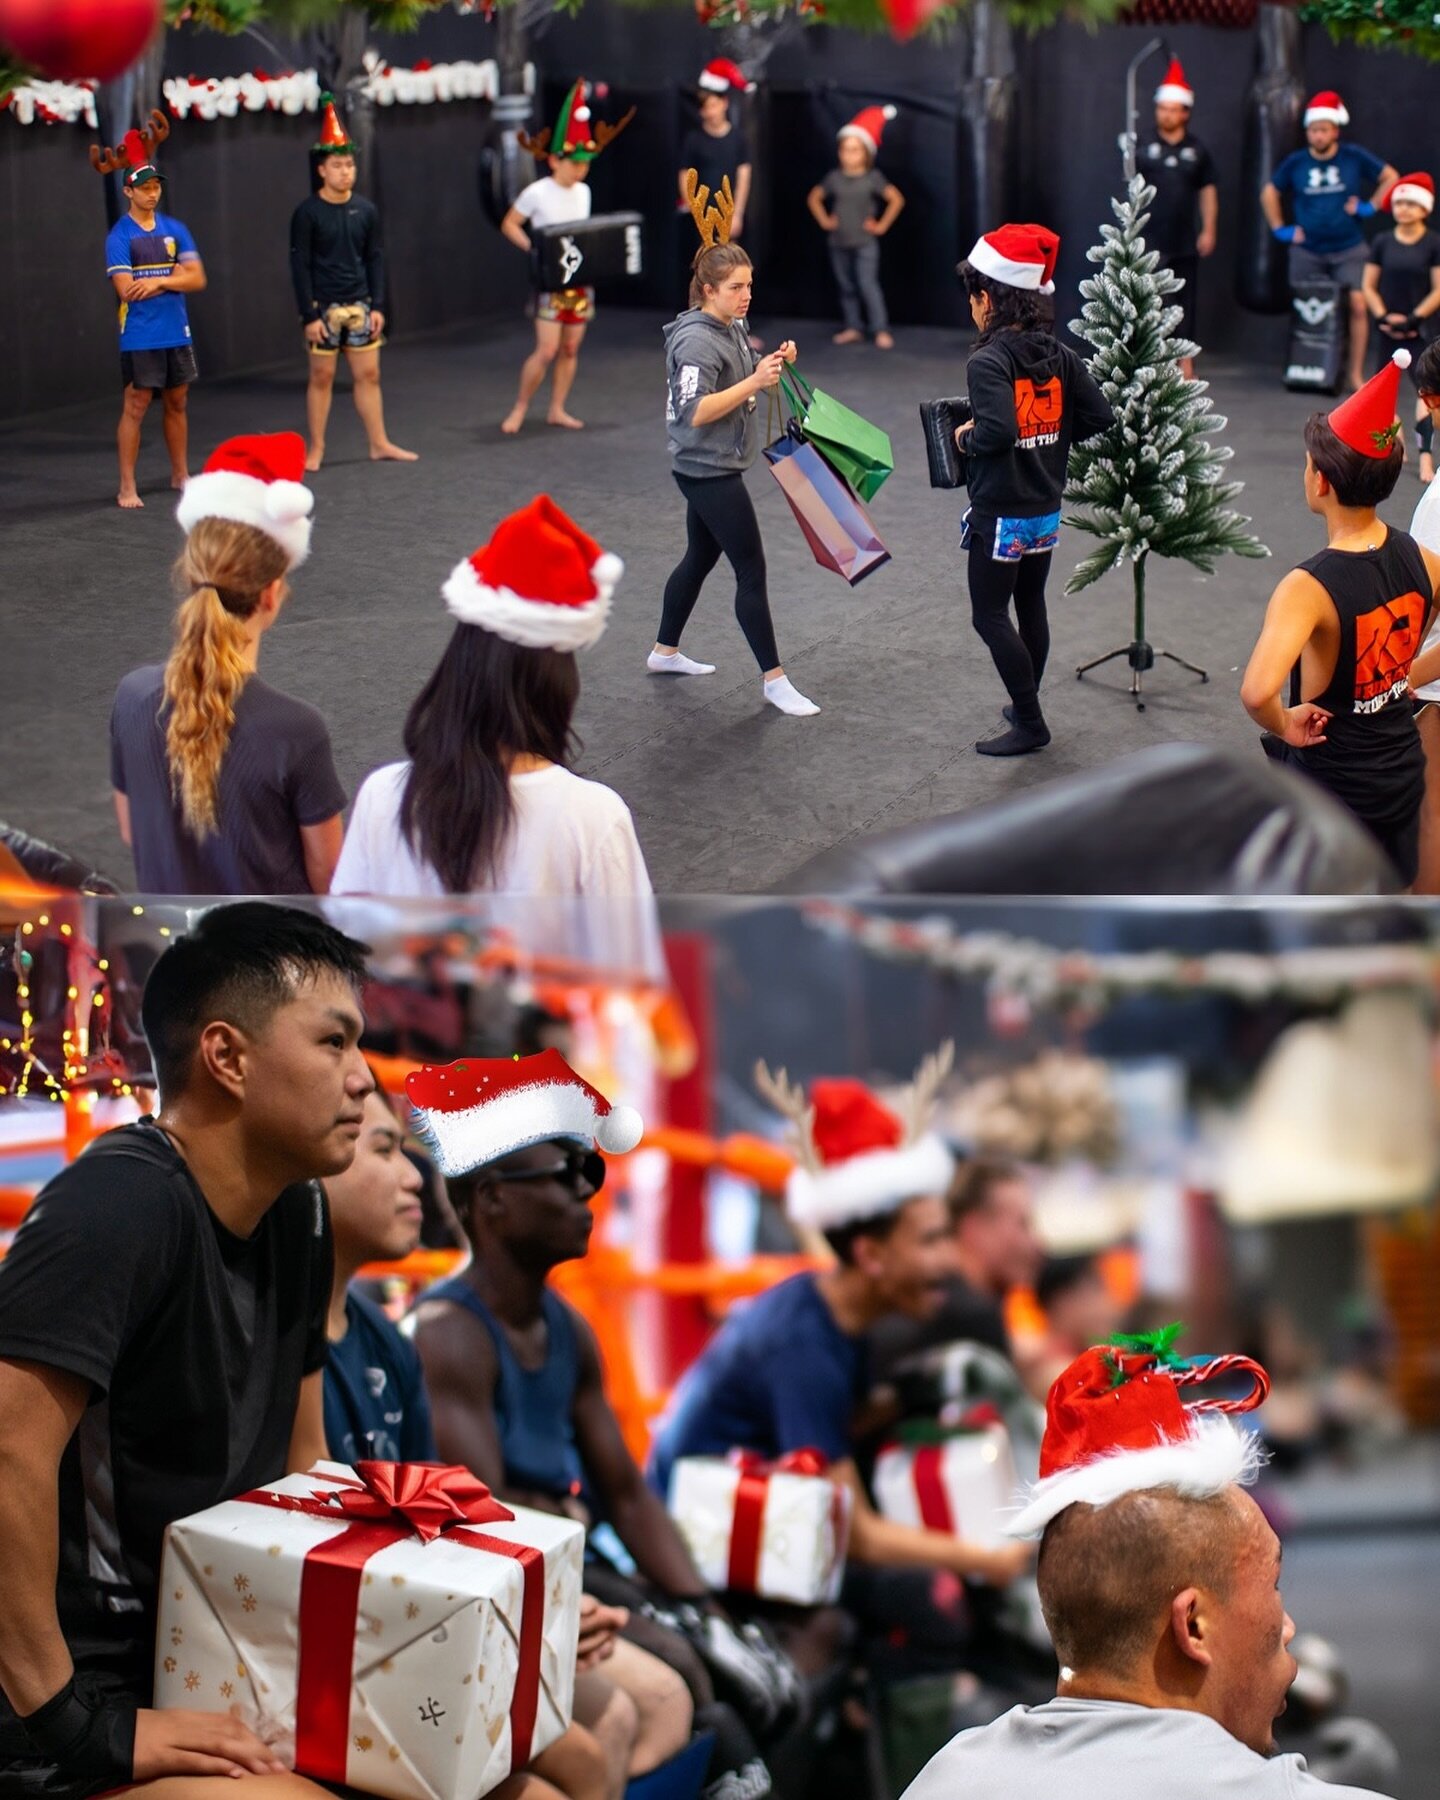 Merry Christmas everyone!! Hope you had a great one and looking forward to seeing everyone again soon!! 🎊🎉🎉

Here are some super real Christmas moments that happened at TRG Muay Thai 🫡